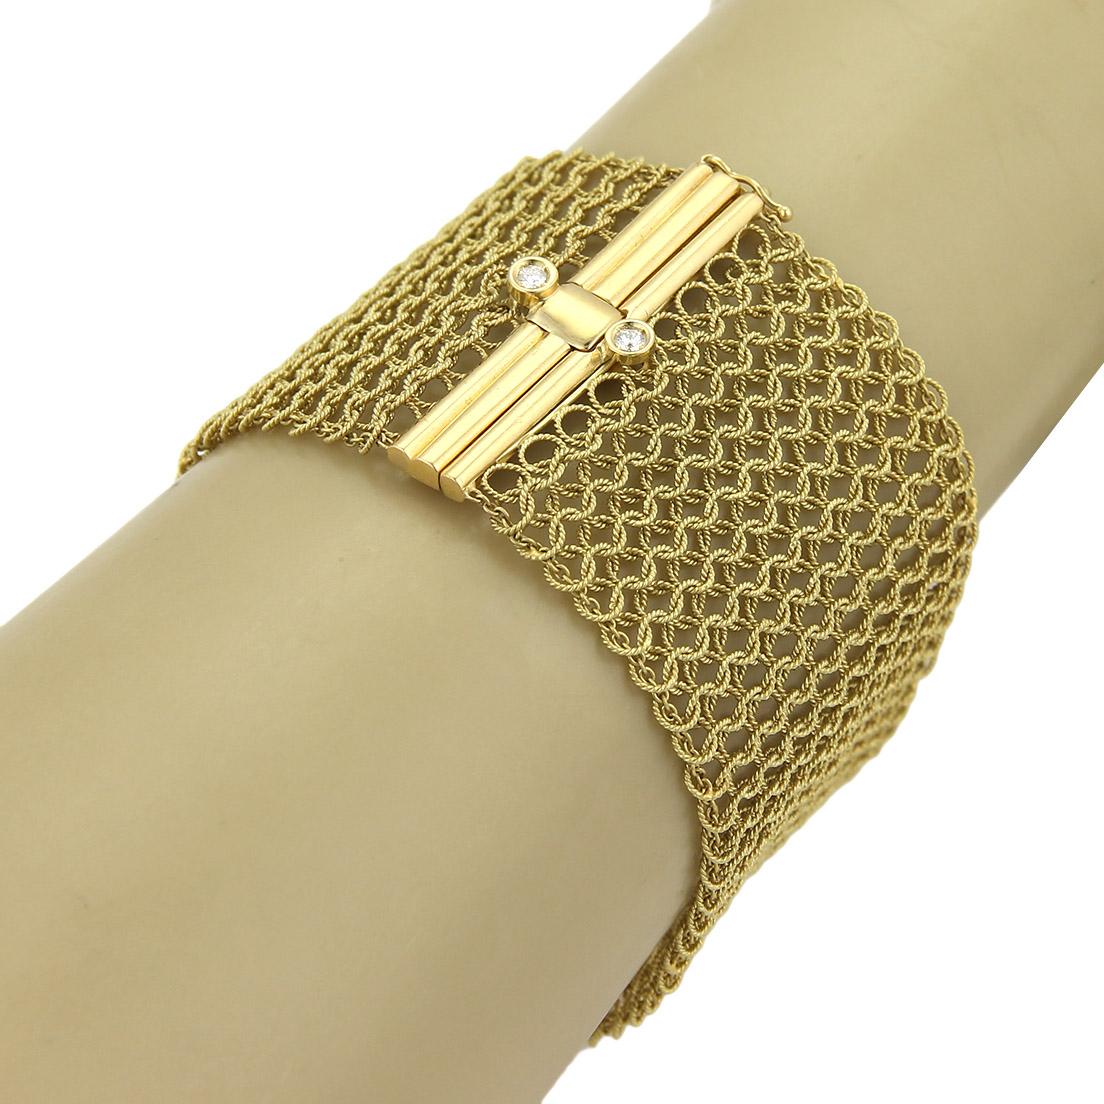 This is a magnificent authentic bracelet from Judith Ripka, it is crafted from solid 18k yellow gold in a polished and textured finish. The impressive 40mm width consist of fine wire cable set in an intricate interlace pattern following along 1.5